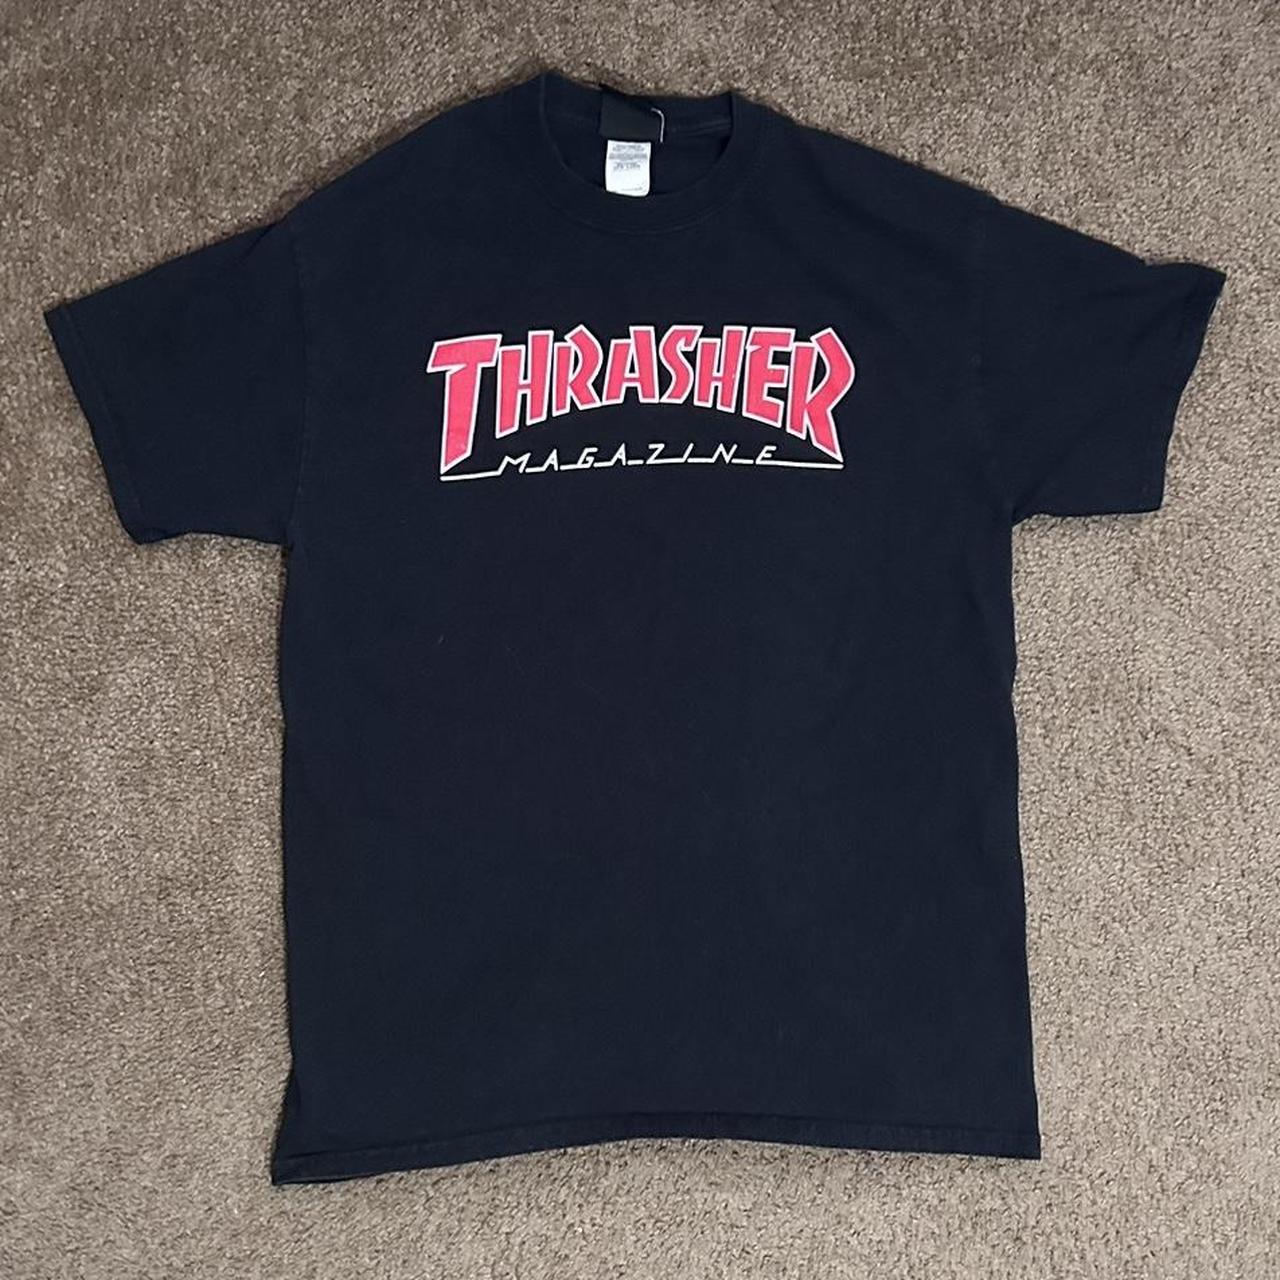 Thrasher Men's Black and Red T-shirt (2)